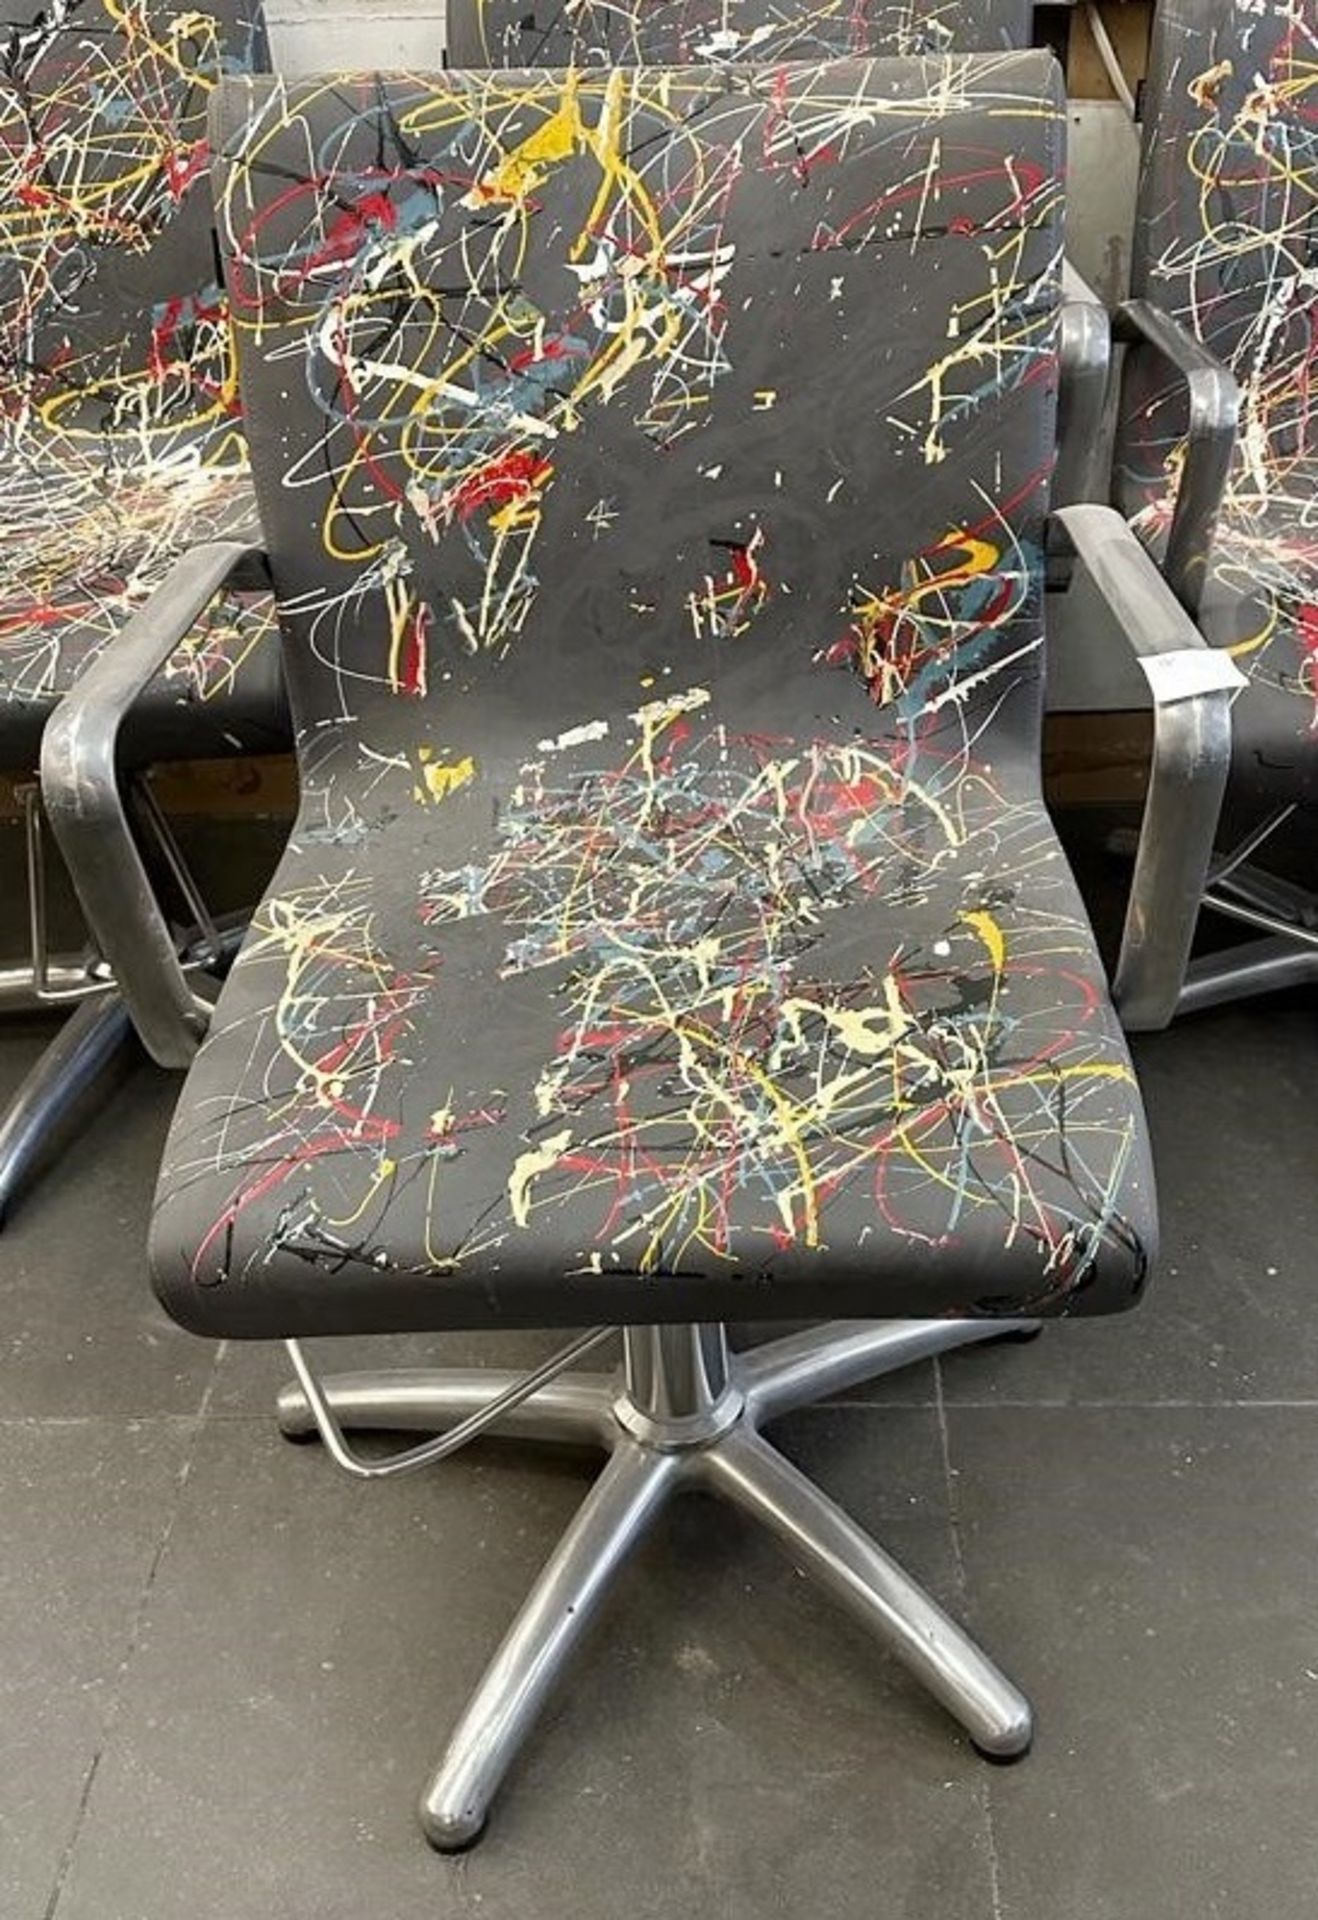 1 x REM Leather Stylist Chair Featuring Especially Commissioned Abstract Paintwork By A Renowned - Image 5 of 7